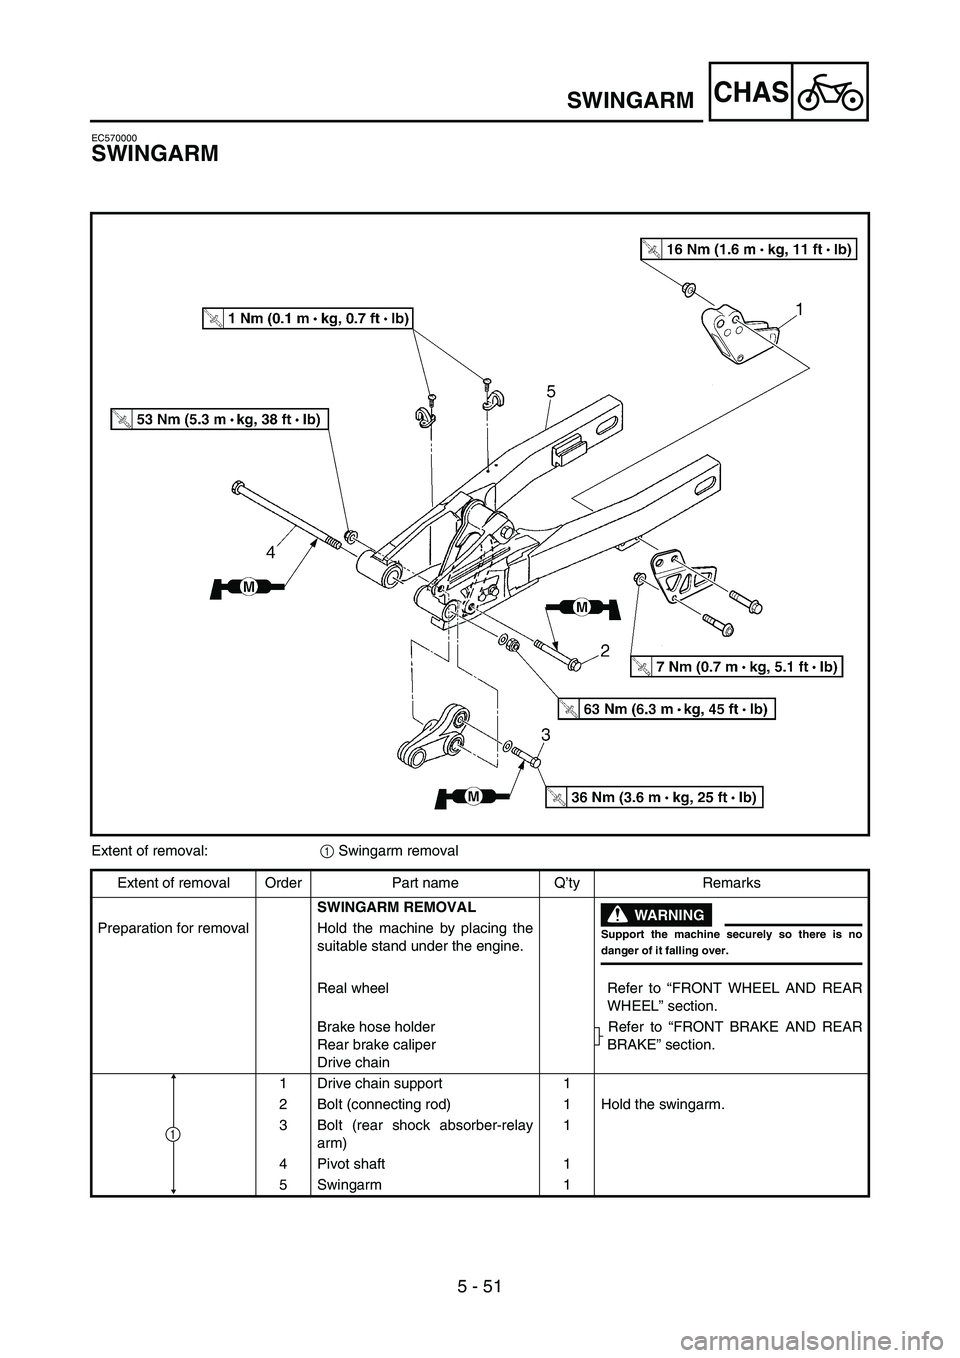 YAMAHA YZ85 2006  Owners Manual 5 - 51
CHASSWINGARM
EC570000
SWINGARM
5PAR0019
Extent of removal:
1 Swingarm removal
Extent of removal Order Part name Q’ty Remarks
SWINGARM REMOVAL
WARNING
Support the machine securely so there is 